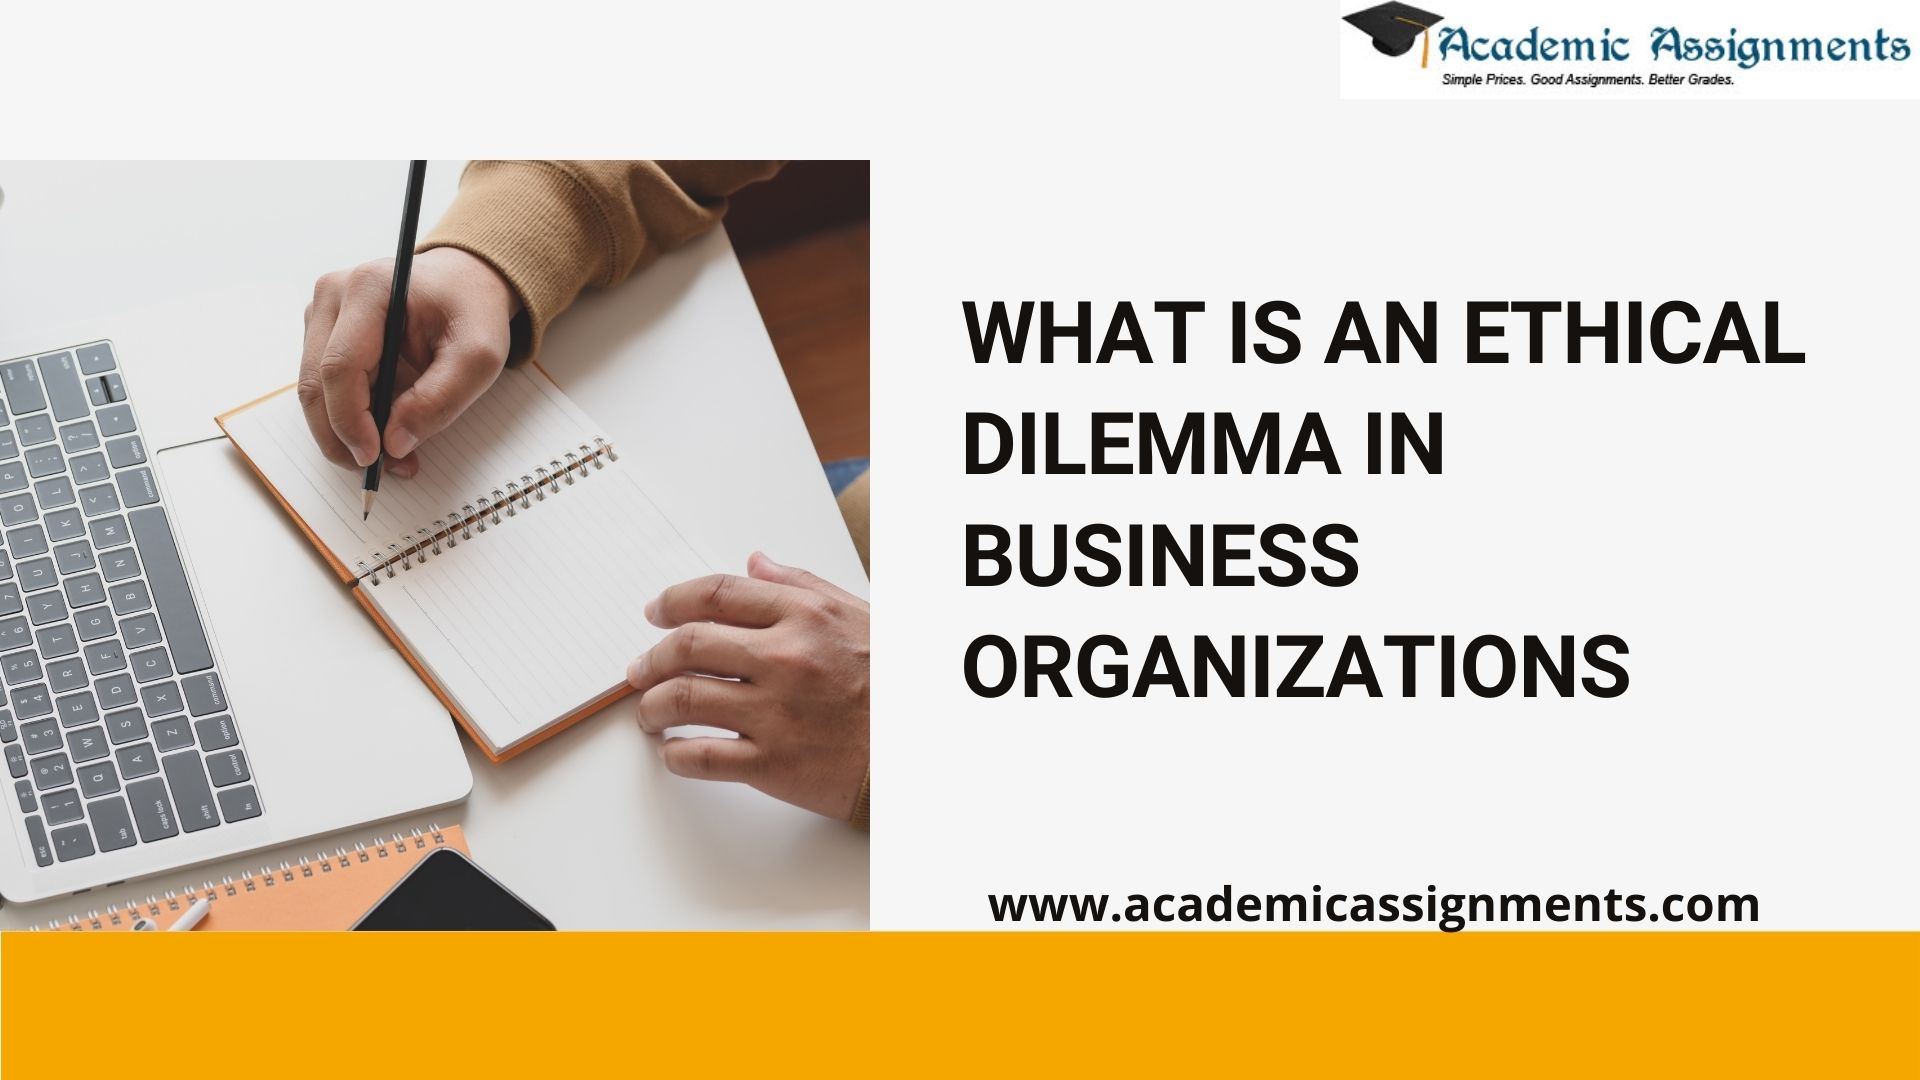 WHAT IS AN ETHICAL DILEMMA IN BUSINESS ORGANIZATIONS